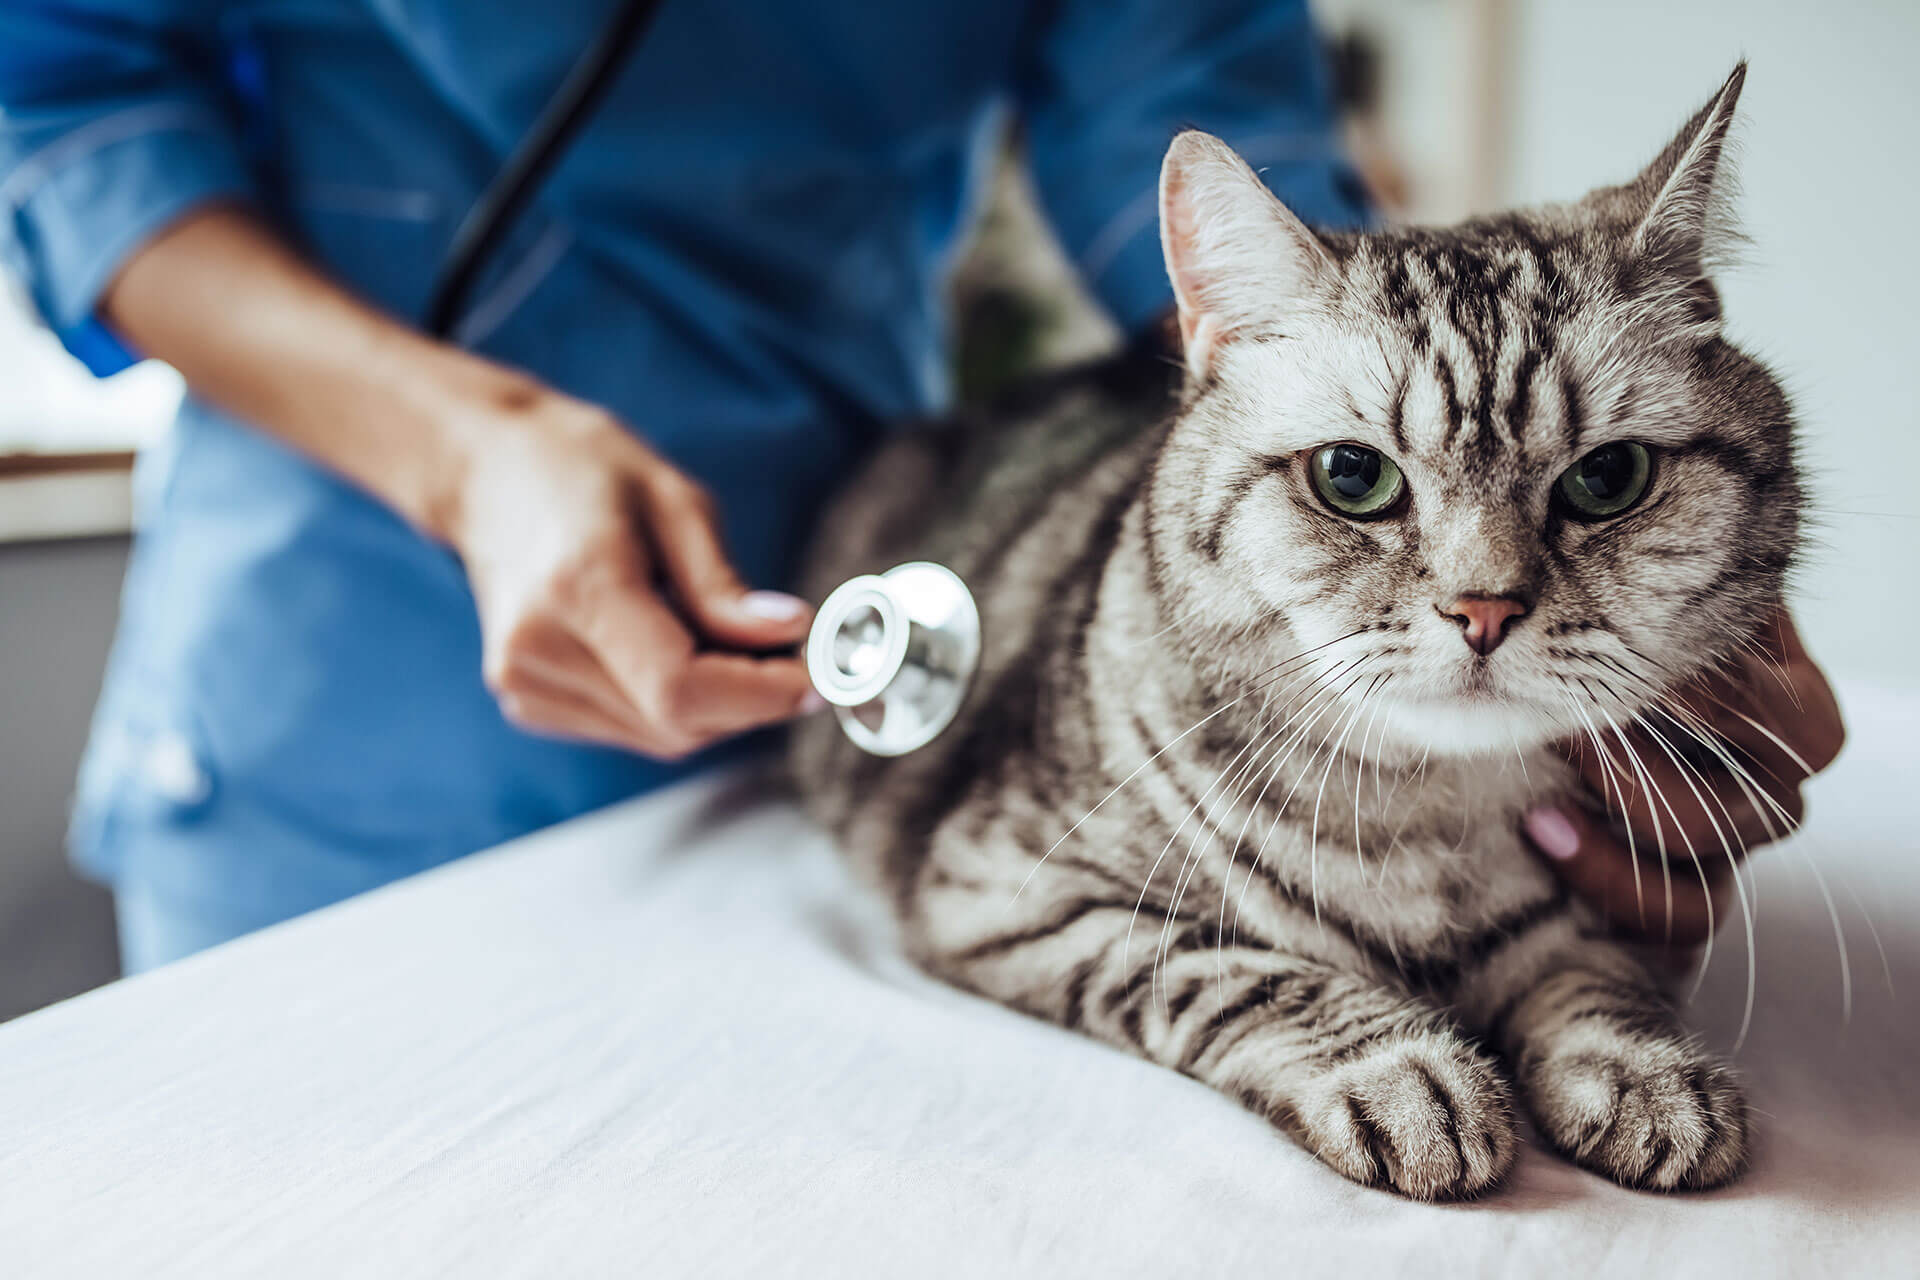 A cat getting checked up at a vet's clinic